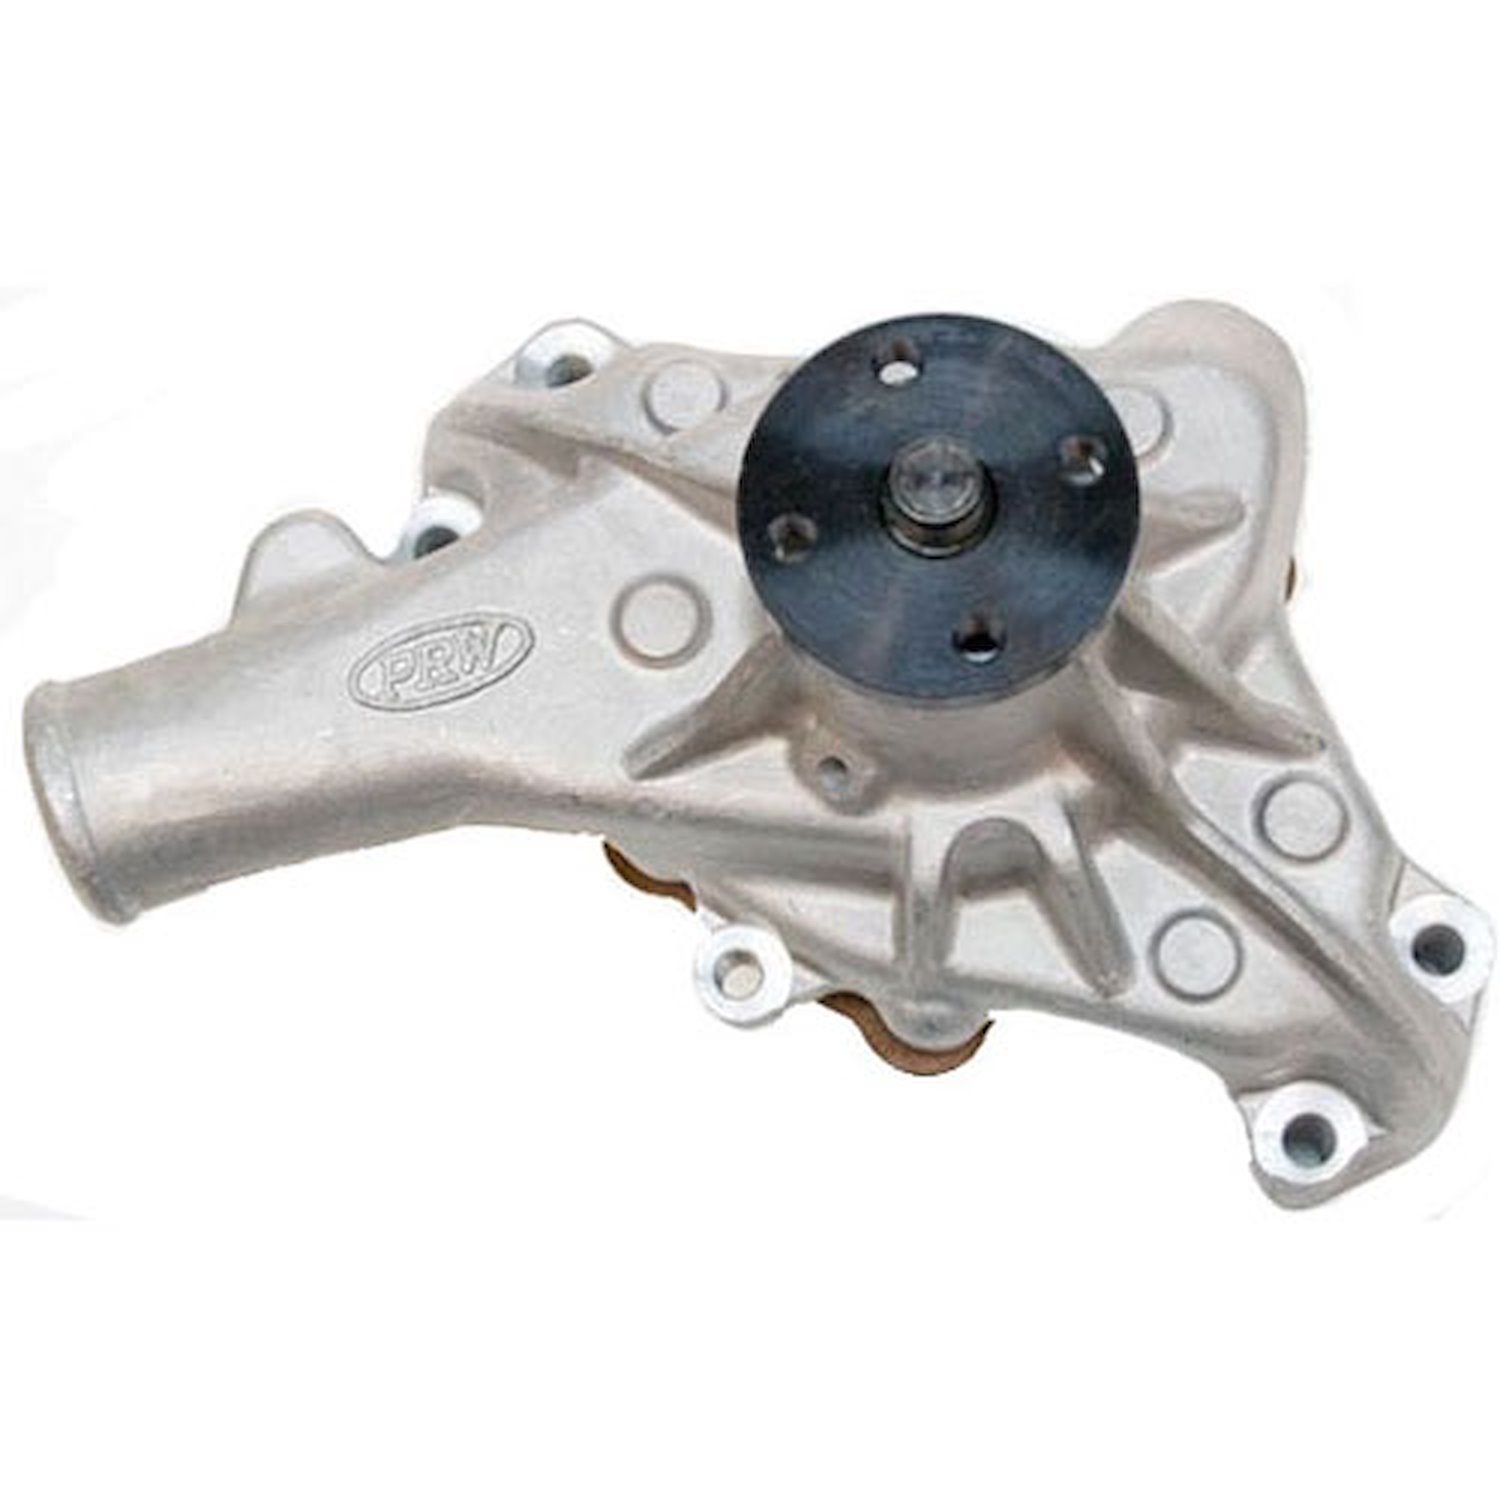 High-Performance Aluminum Water Pump 1987-95 Chevy V6 and Small Block V8